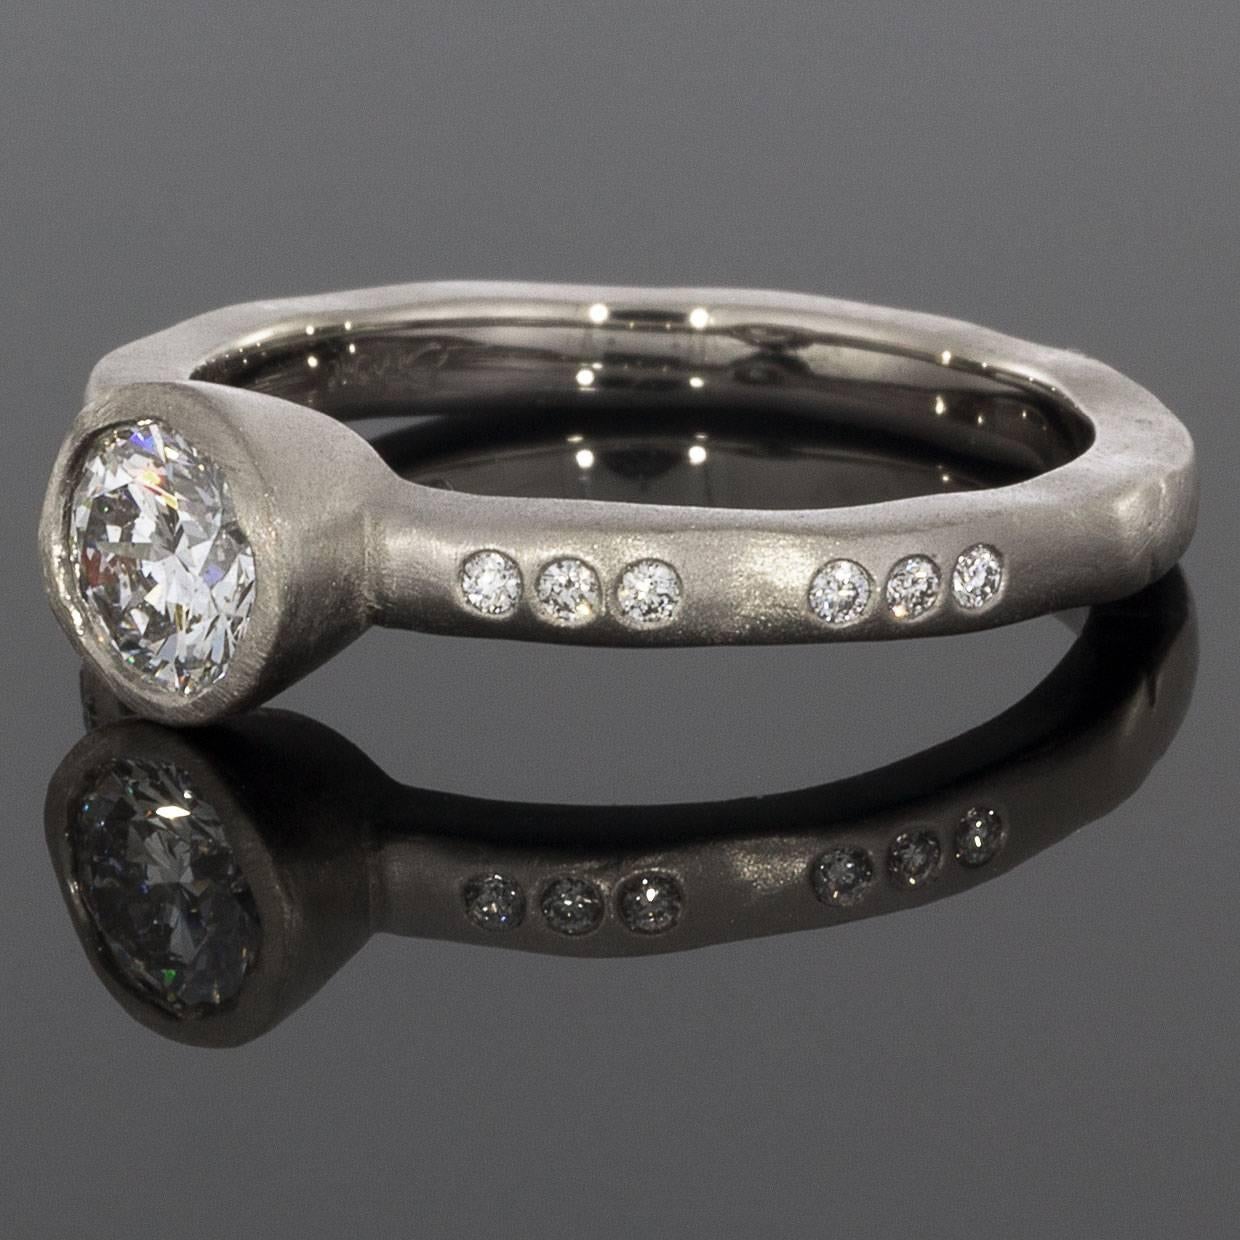 Take her breath away with this spectacular 0.59ctw diamond ring from Martin Flyer! This 65 year old, third generation family owned business handcrafts all their rings with extraordinary attention to detail. This beautiful Martin Flyer ring is from